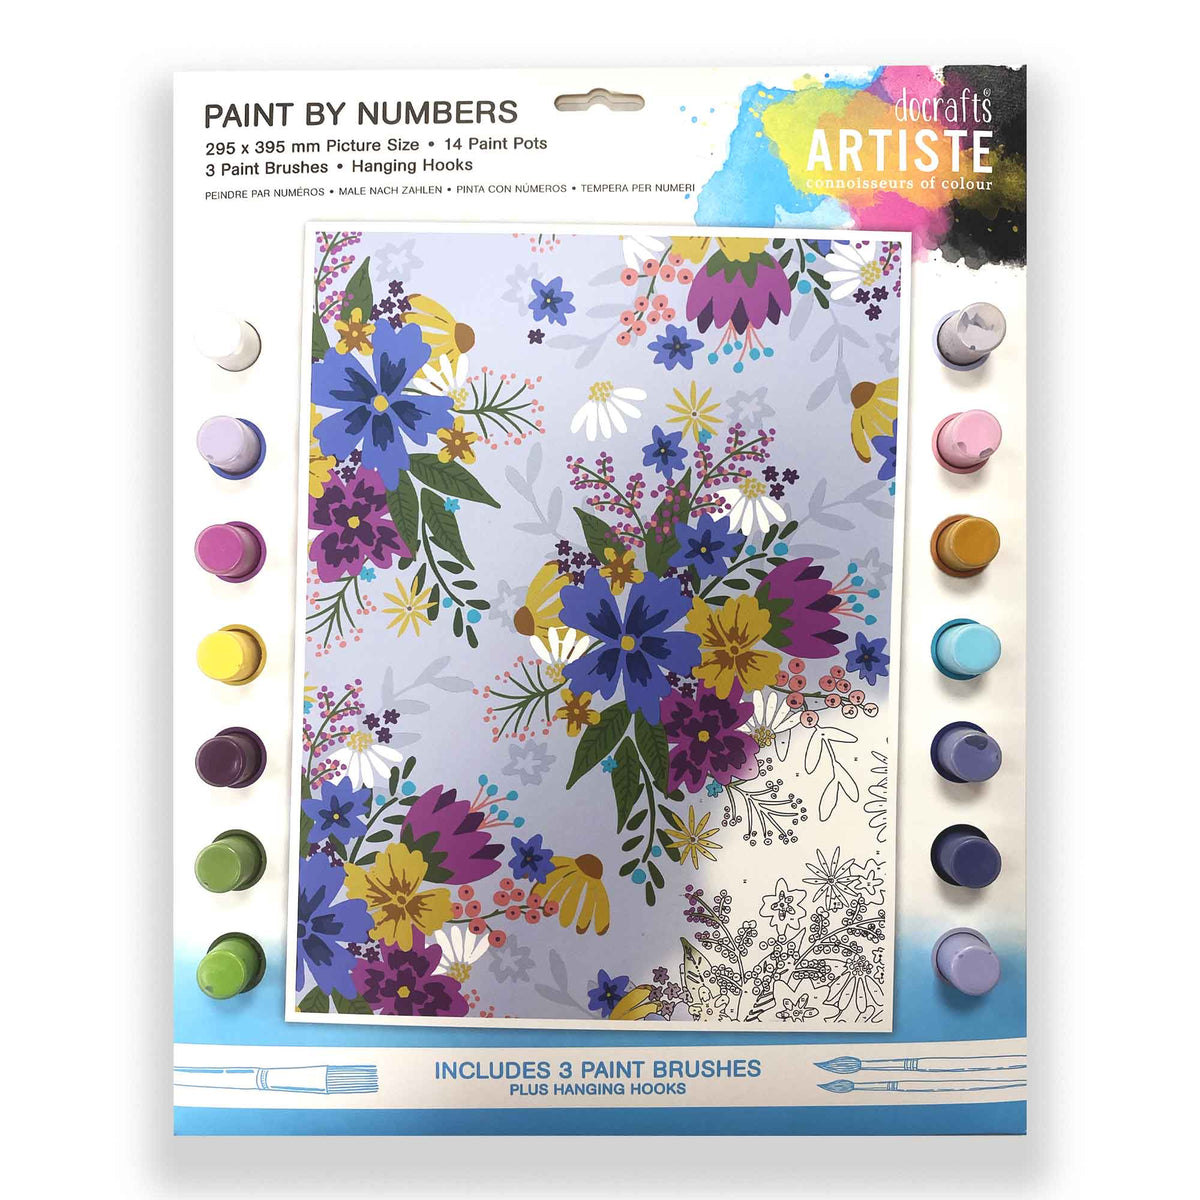 Docrafts Artiste Paint by Numbers (295 x 395mm) Crowded Florals